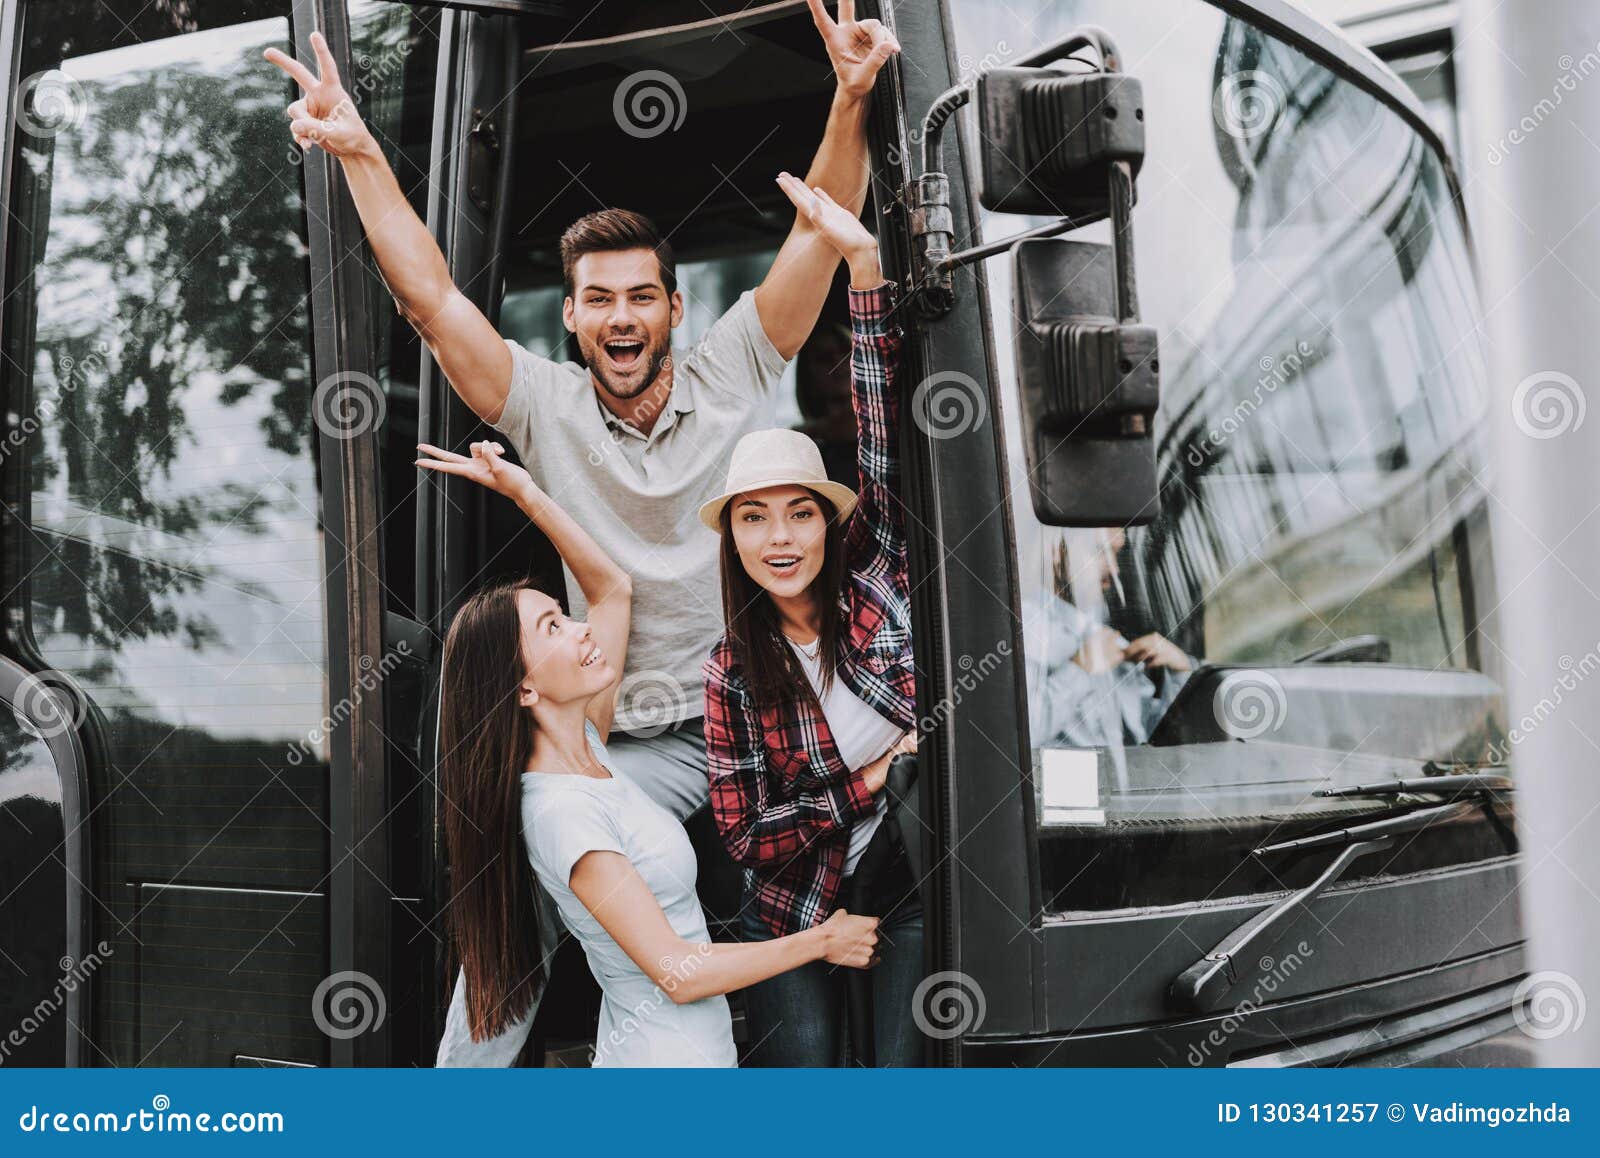 young smiling people traveling on tourist bus